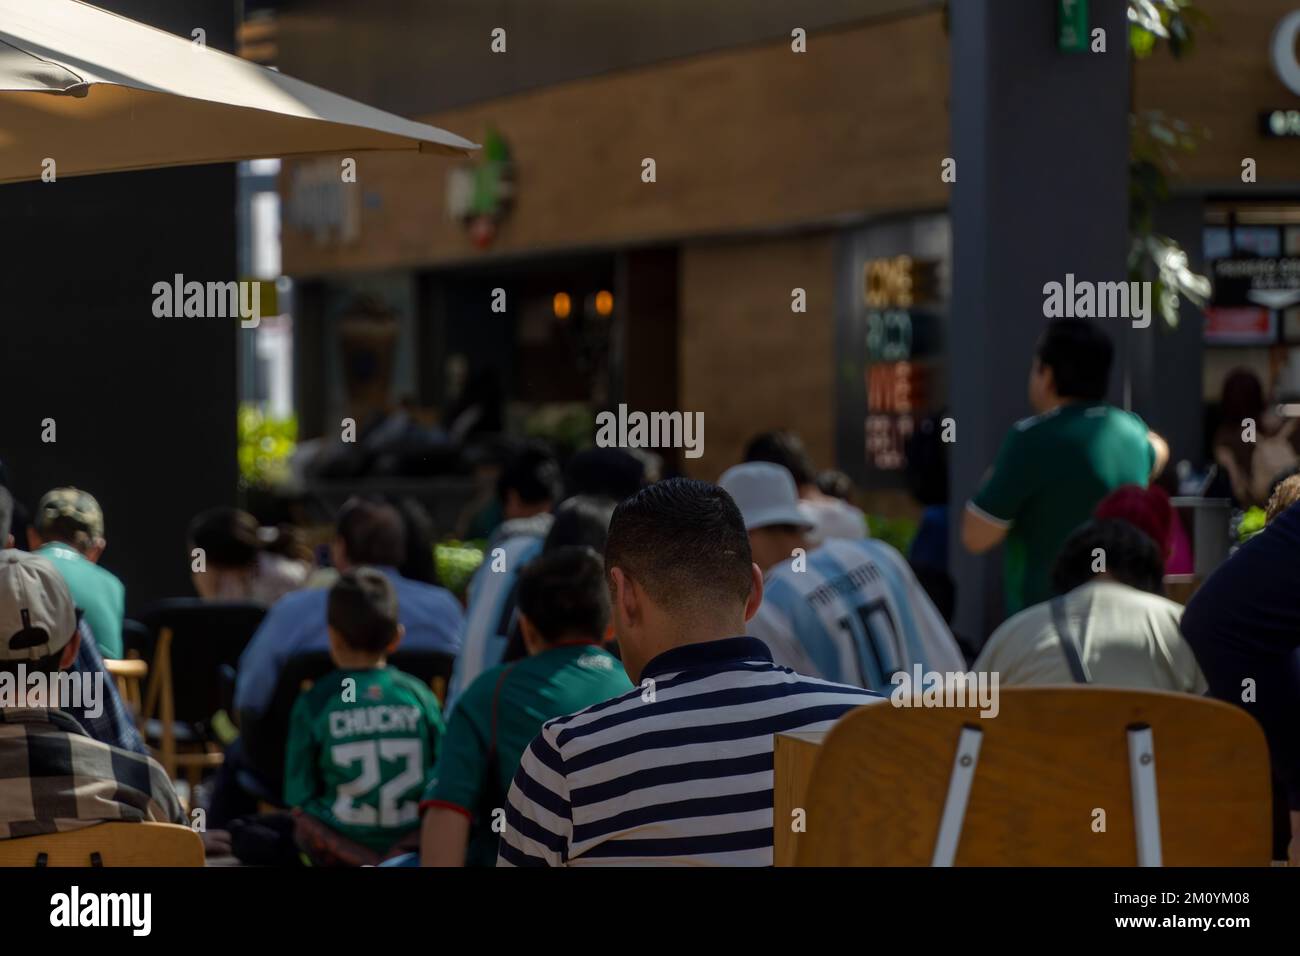 Fans of Mexico during the World Cup Round watching the game in a shopping mall Stock Photo